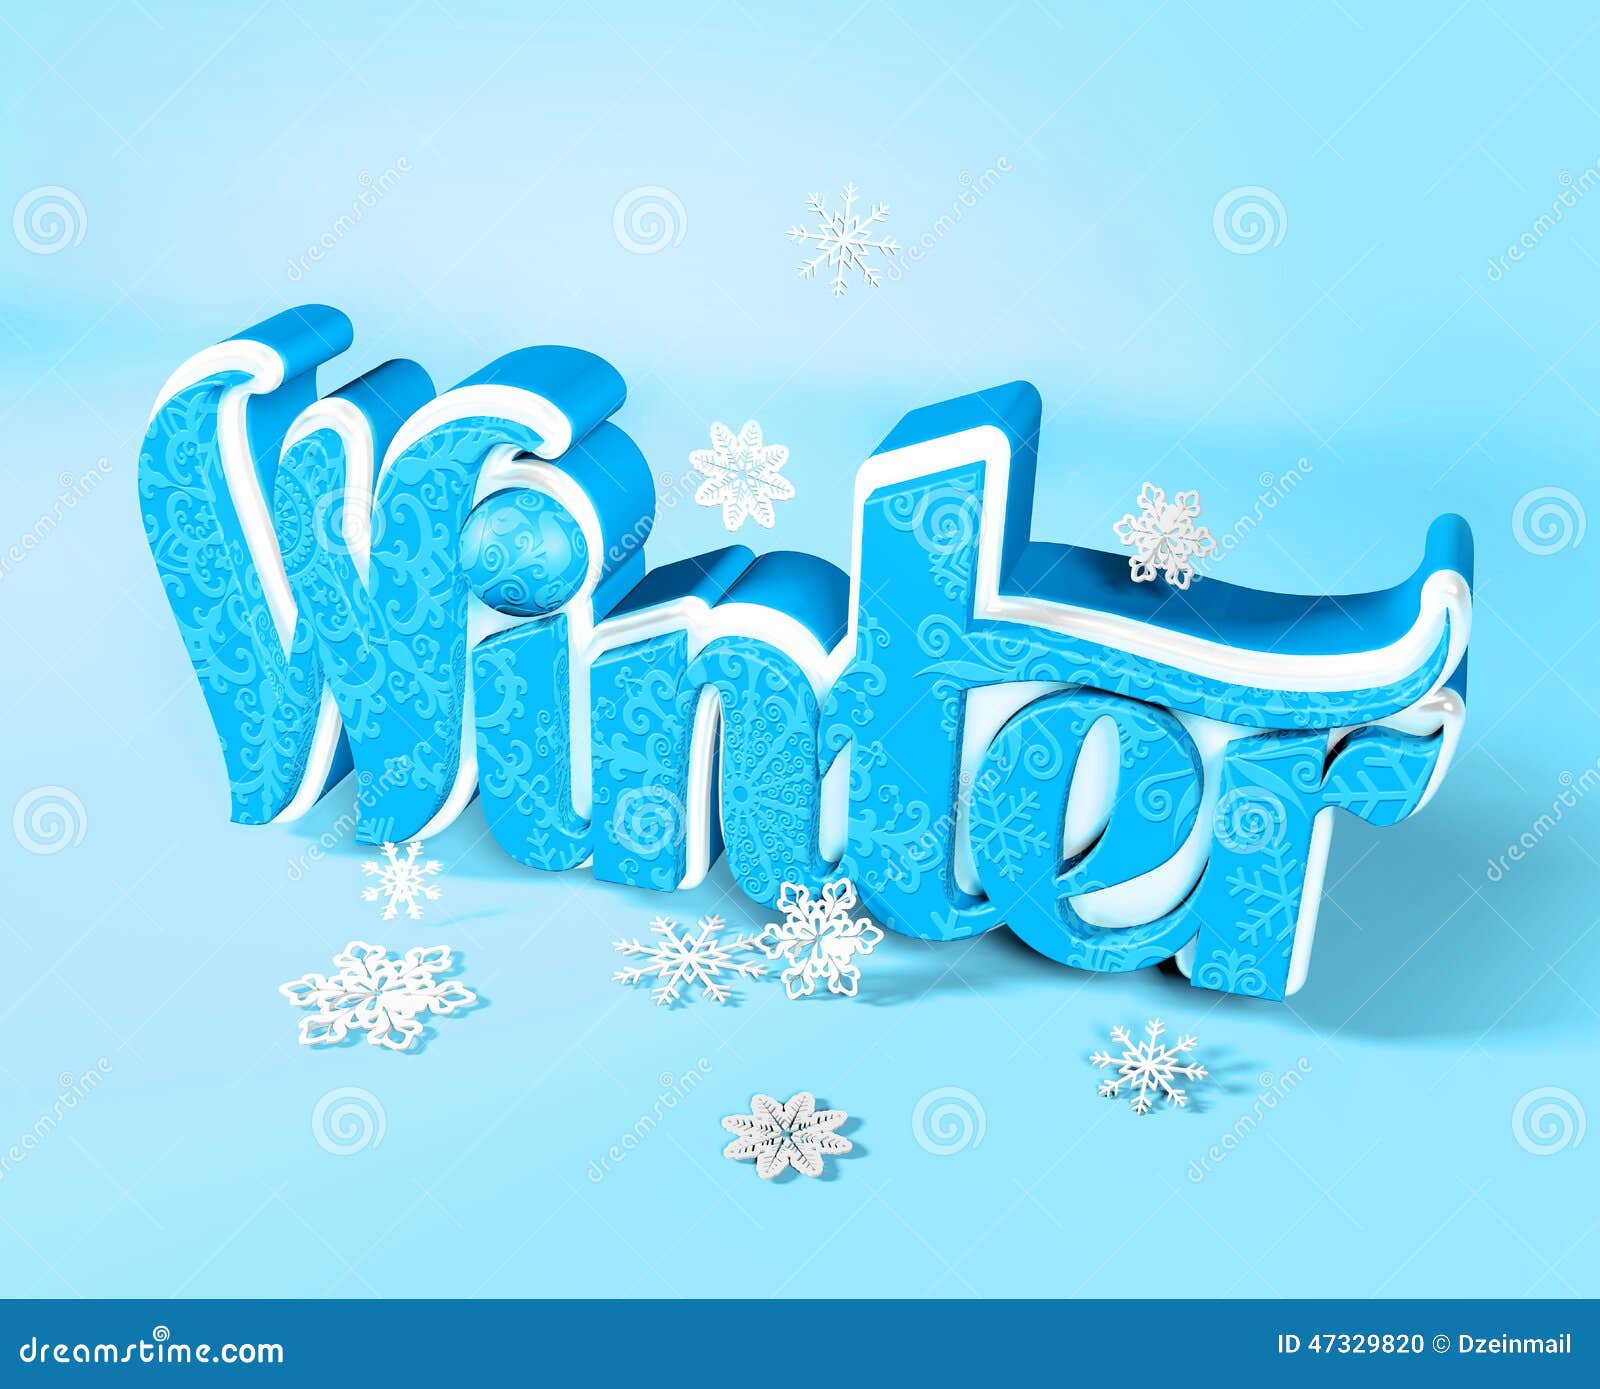 snowflake clipart in word - photo #6